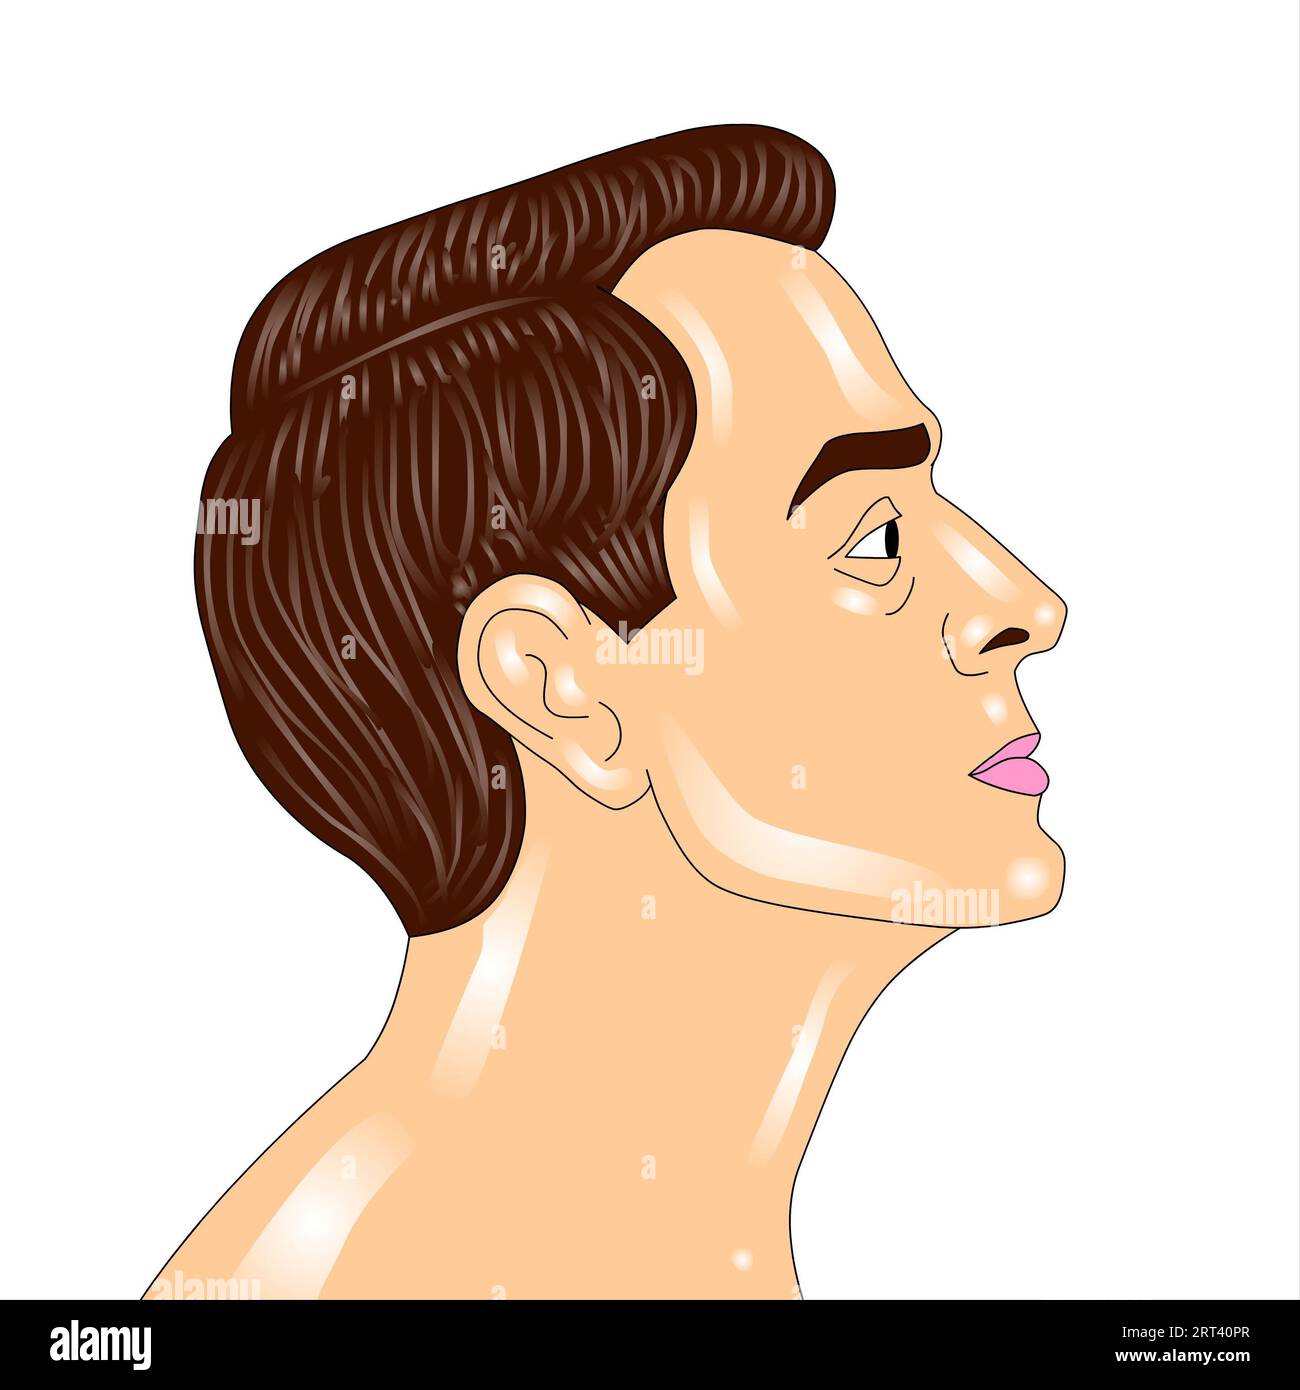 Illustration of a profile of a young man. Vector illustration. Stock Photo